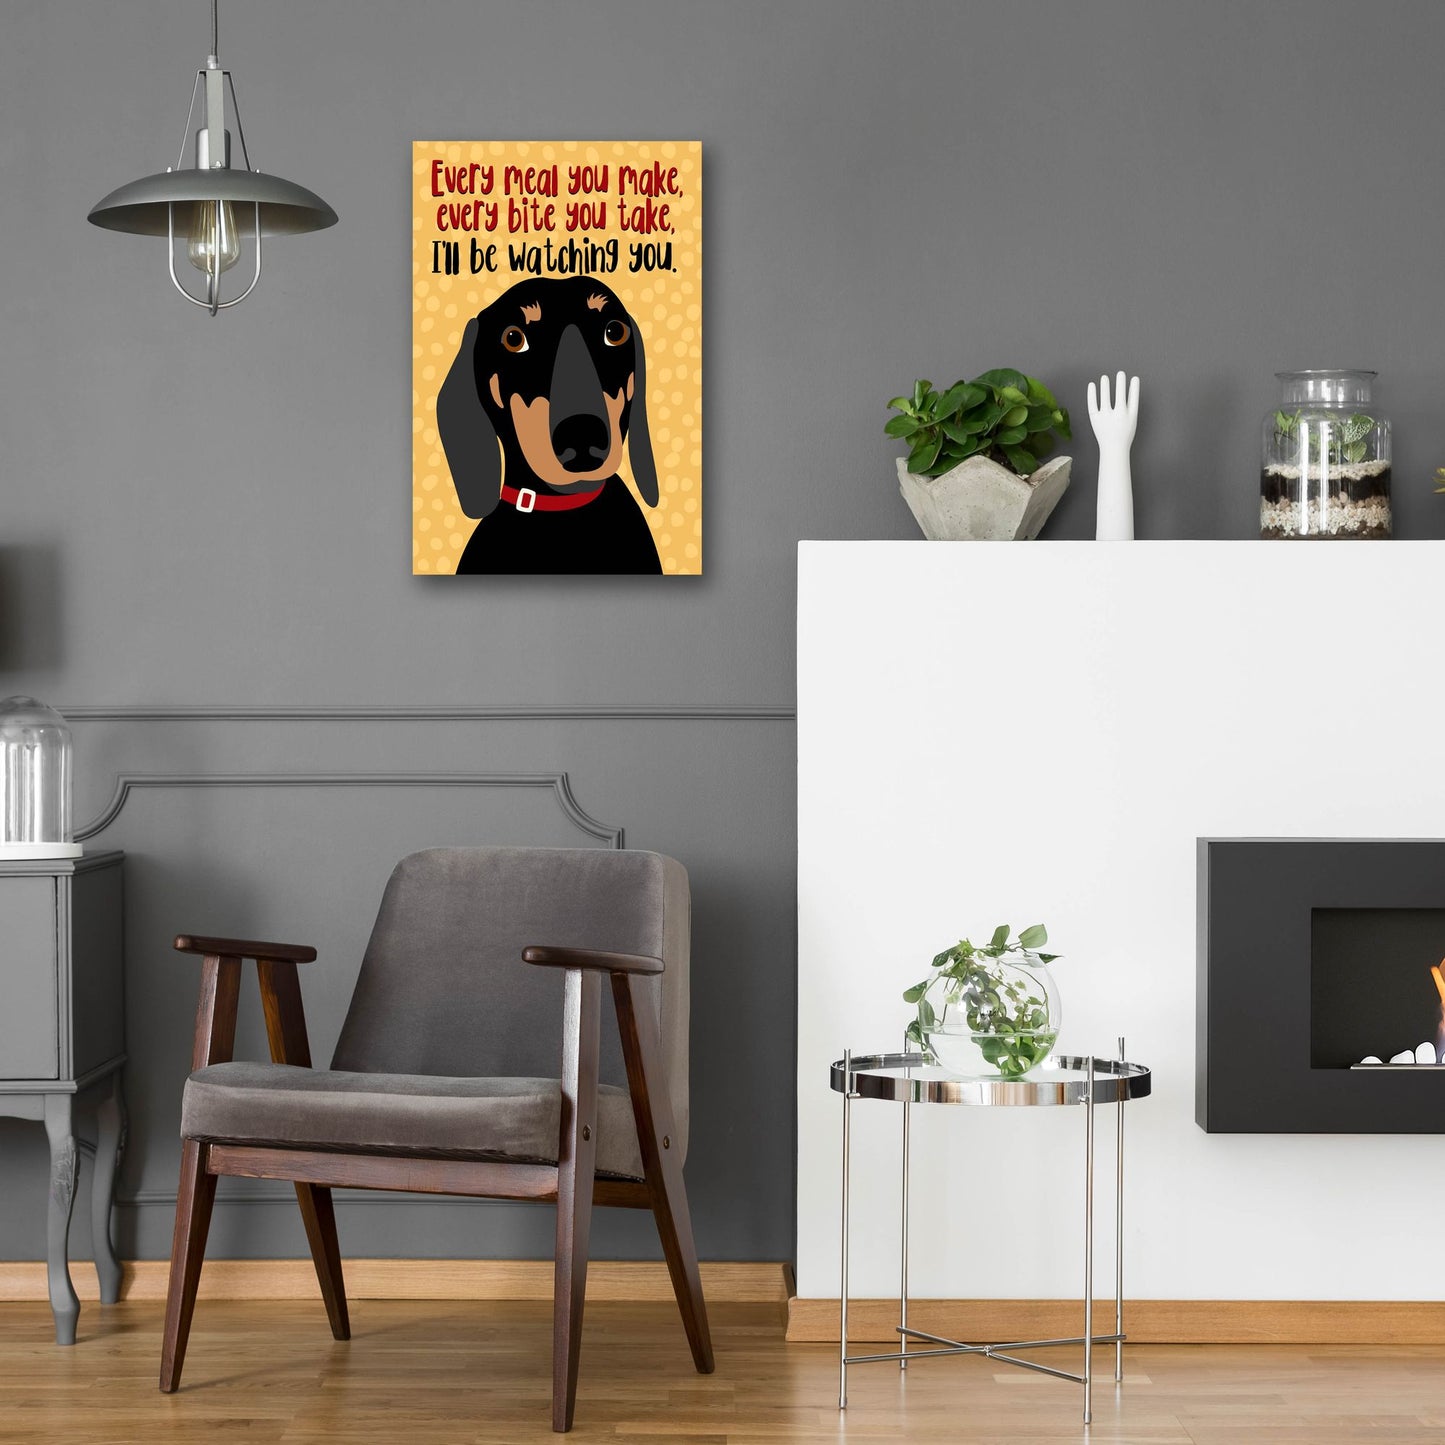 Epic Art 'Dachshund Every Meal You Make' by Ginger Oliphant, Acrylic Glass Wall Art,16x24